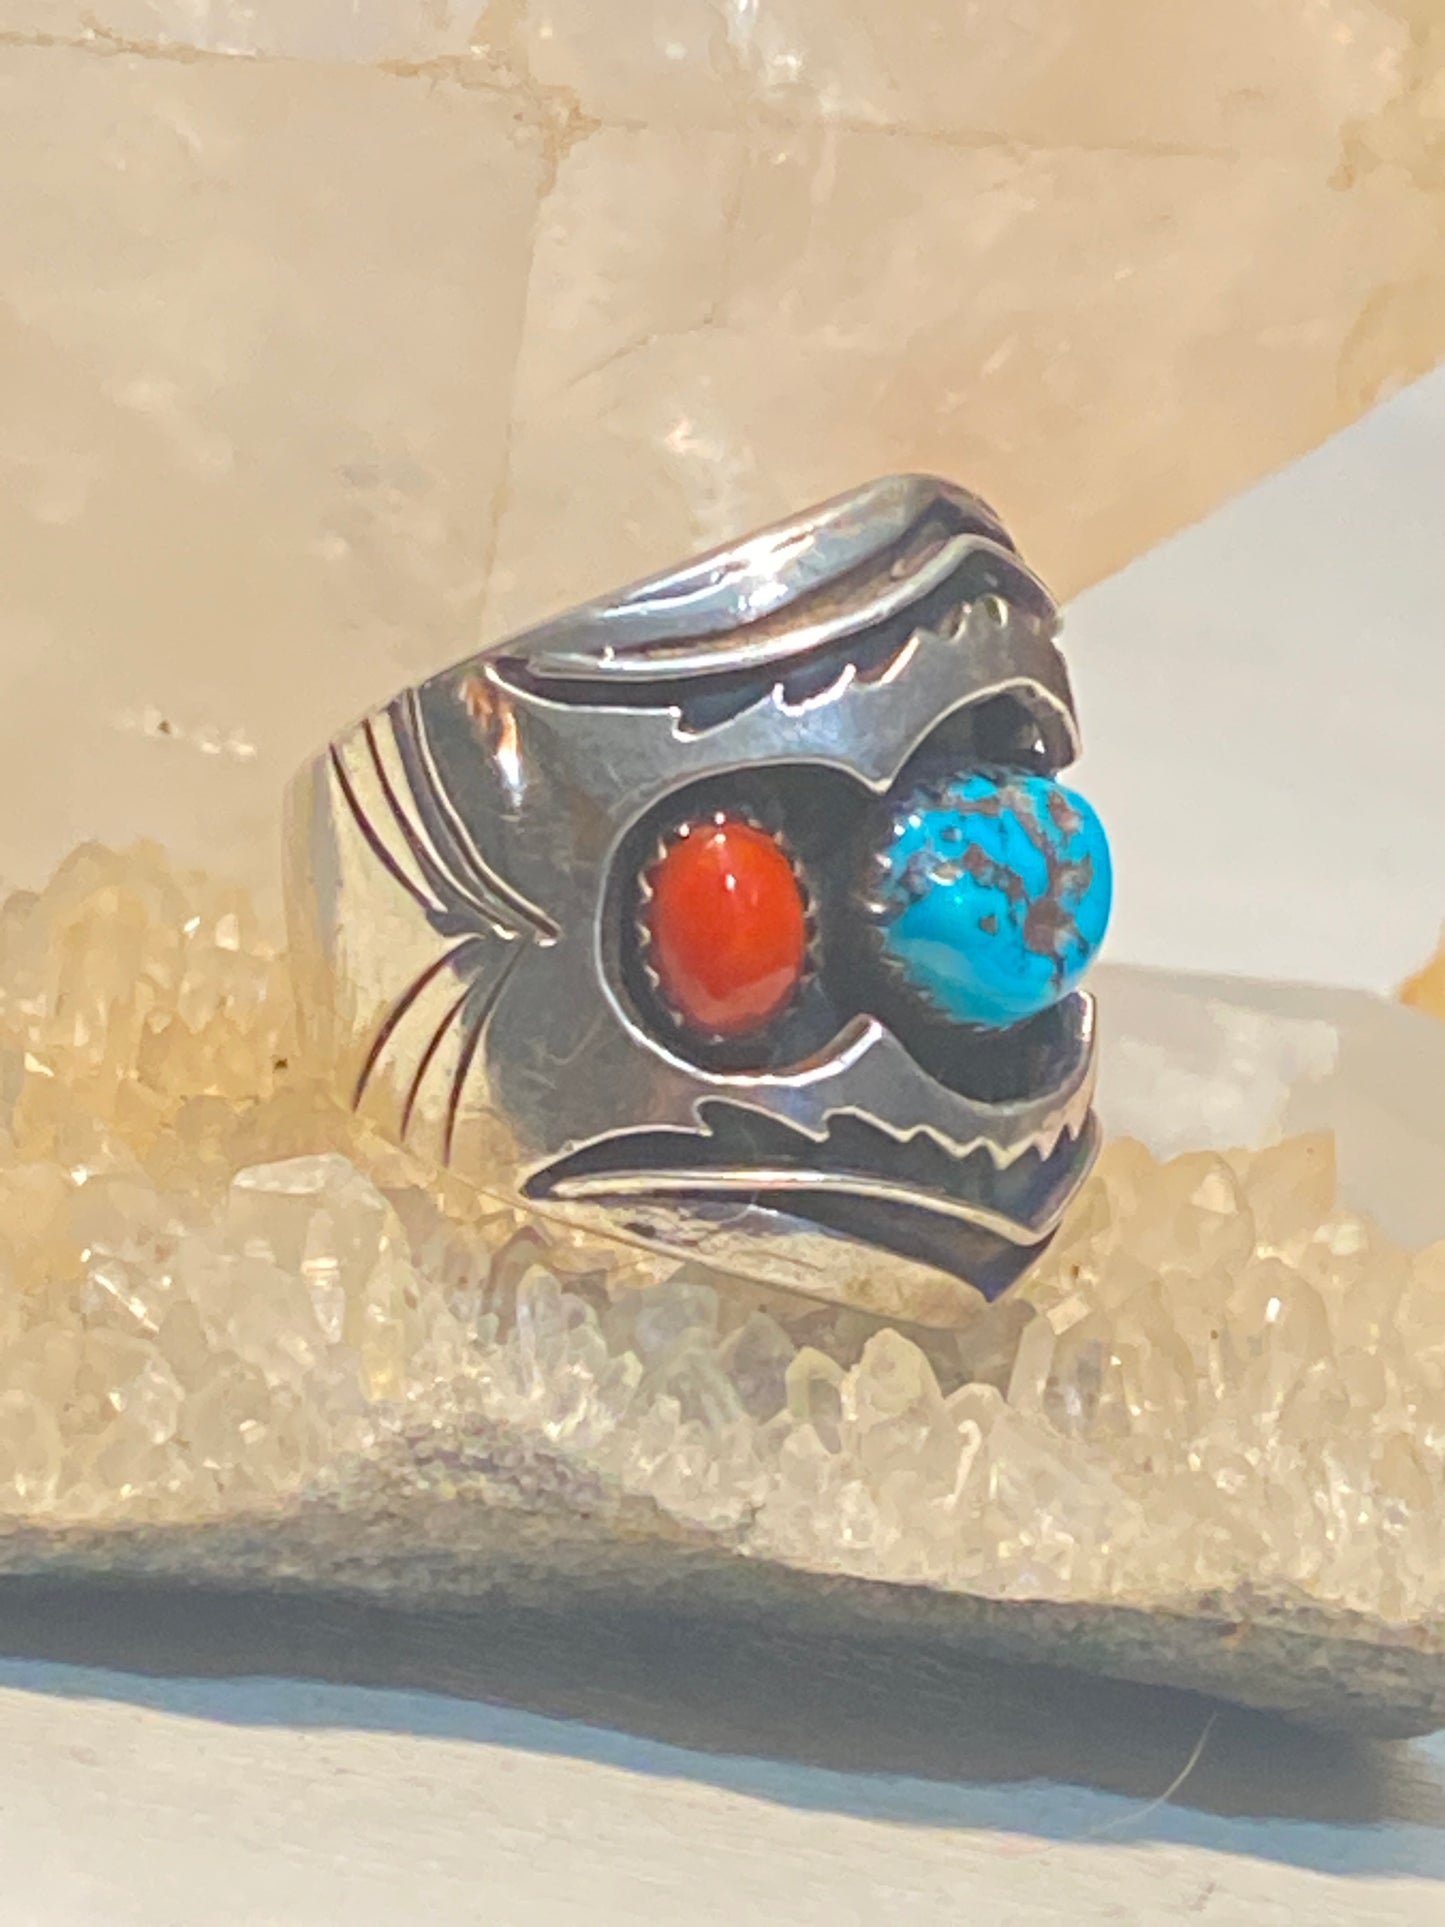 Turquoise Ring size 10.75 Navajo coral band southwest sterling silver women men